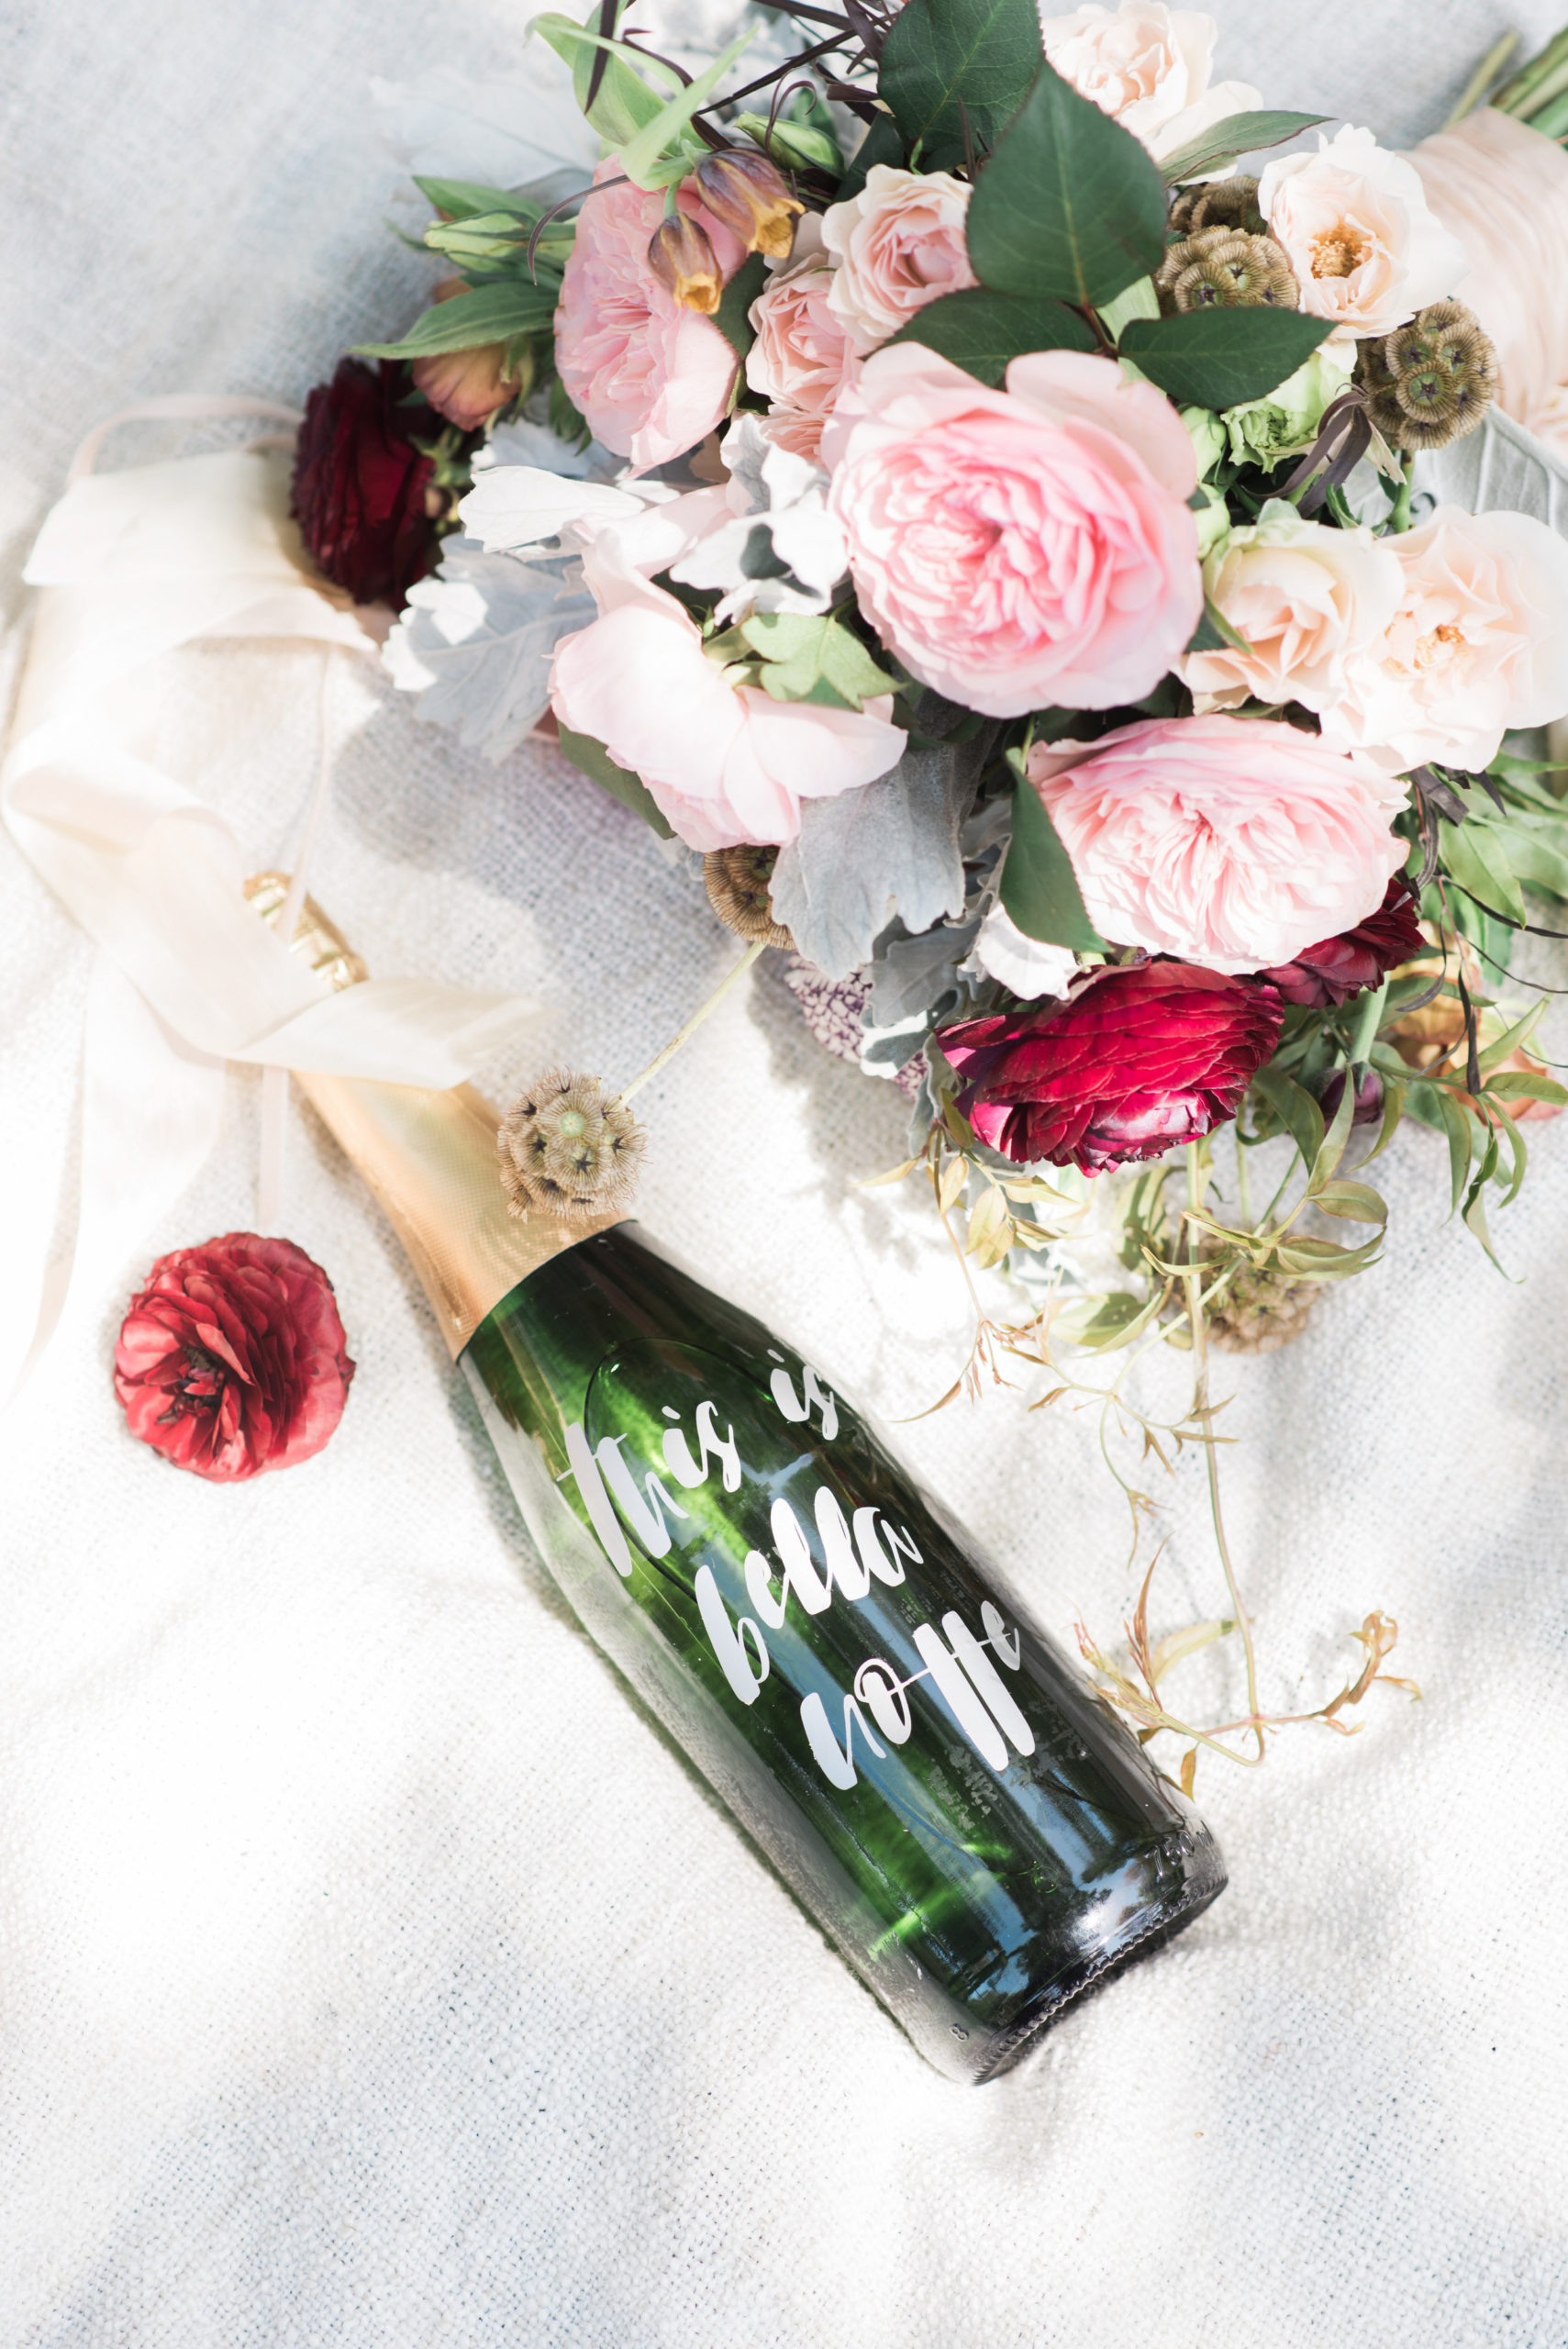 The Lady and the Tramp wedding included a custom champagne bottle with Bella Notte in vinyl